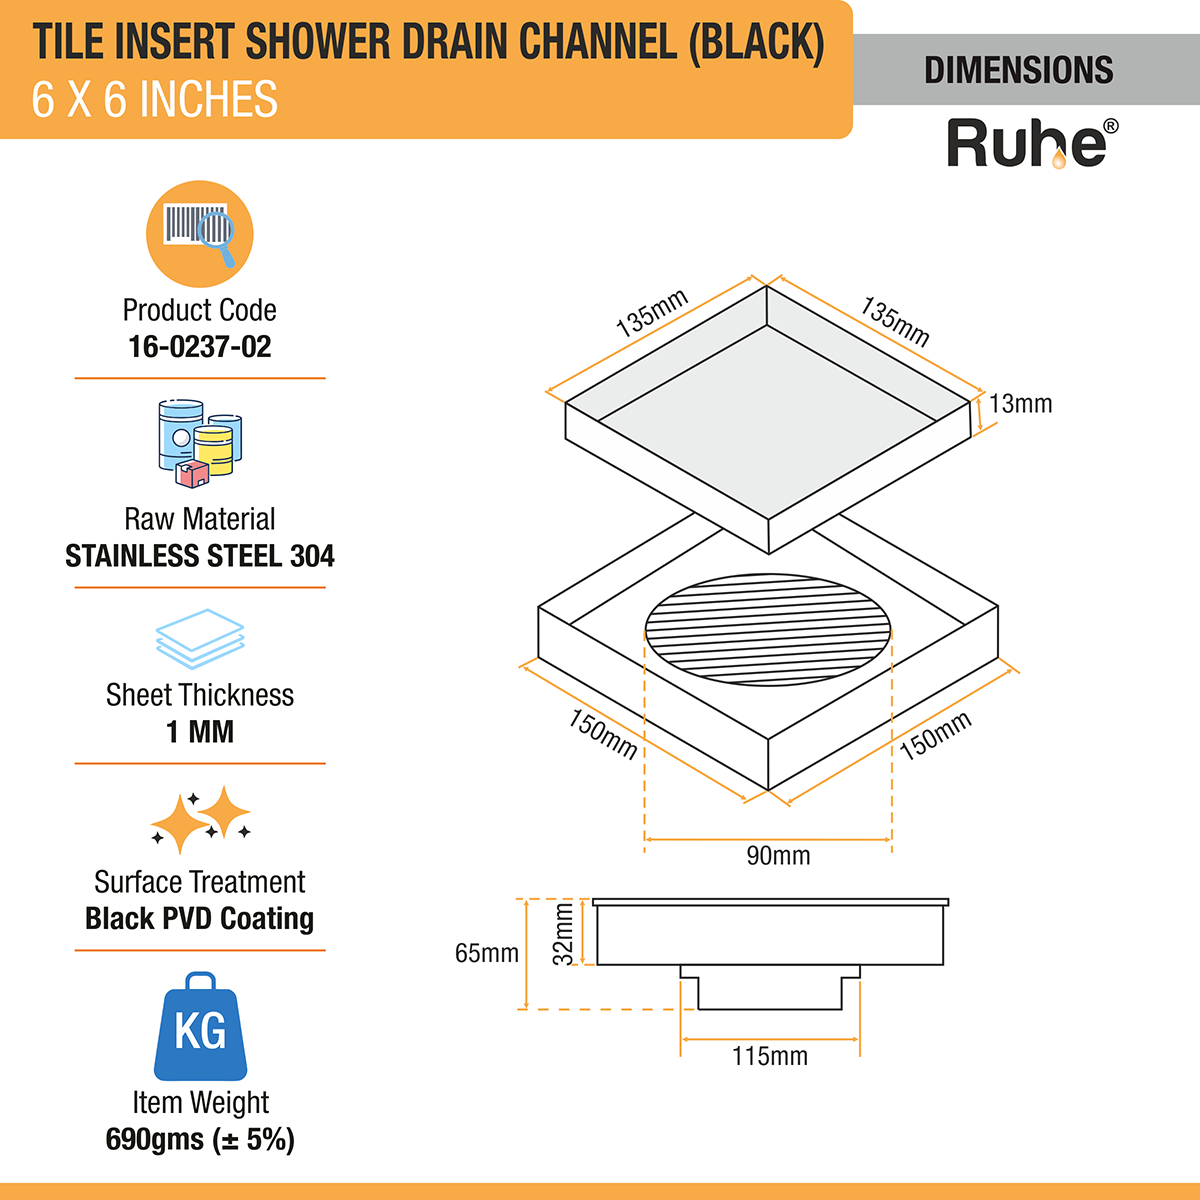 Tile Insert Shower Drain Channel (6 x 6 Inches) Black PVD Coated dimensions and sizes